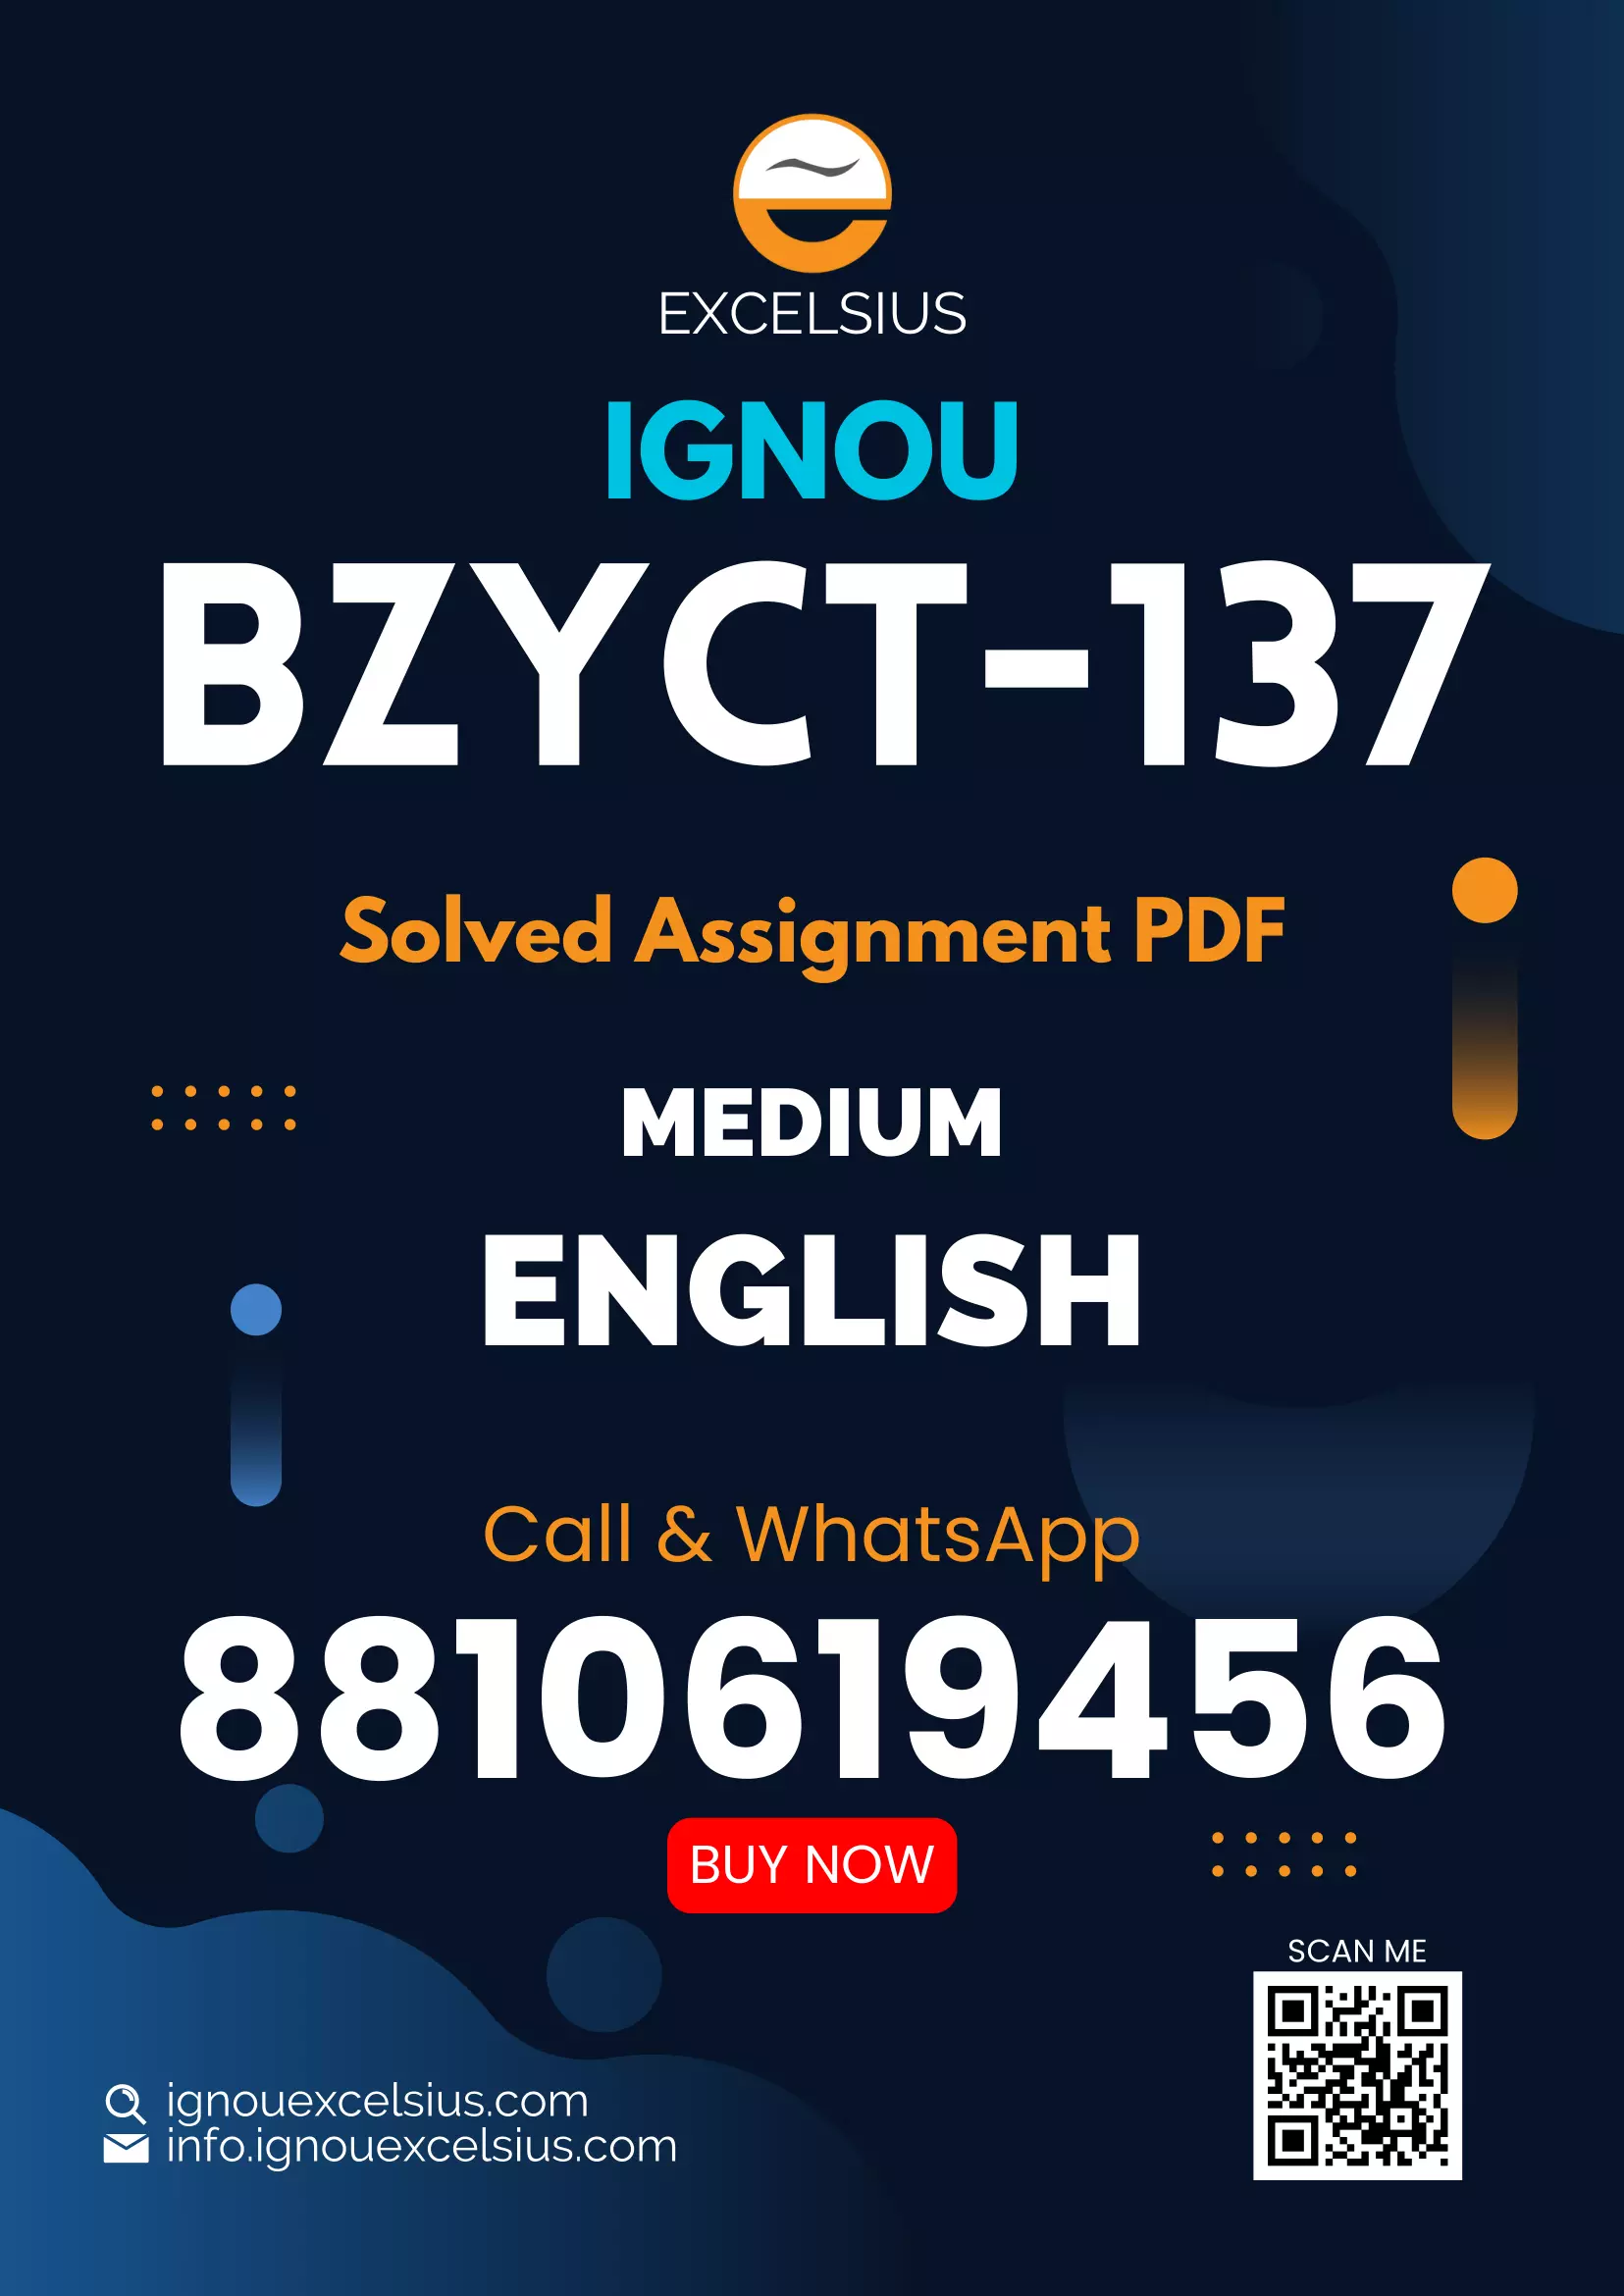 IGNOU BZYCT-137 - Genetics and Evolutionary Biology, Latest Solved Assignment-January 2023 - December 2023